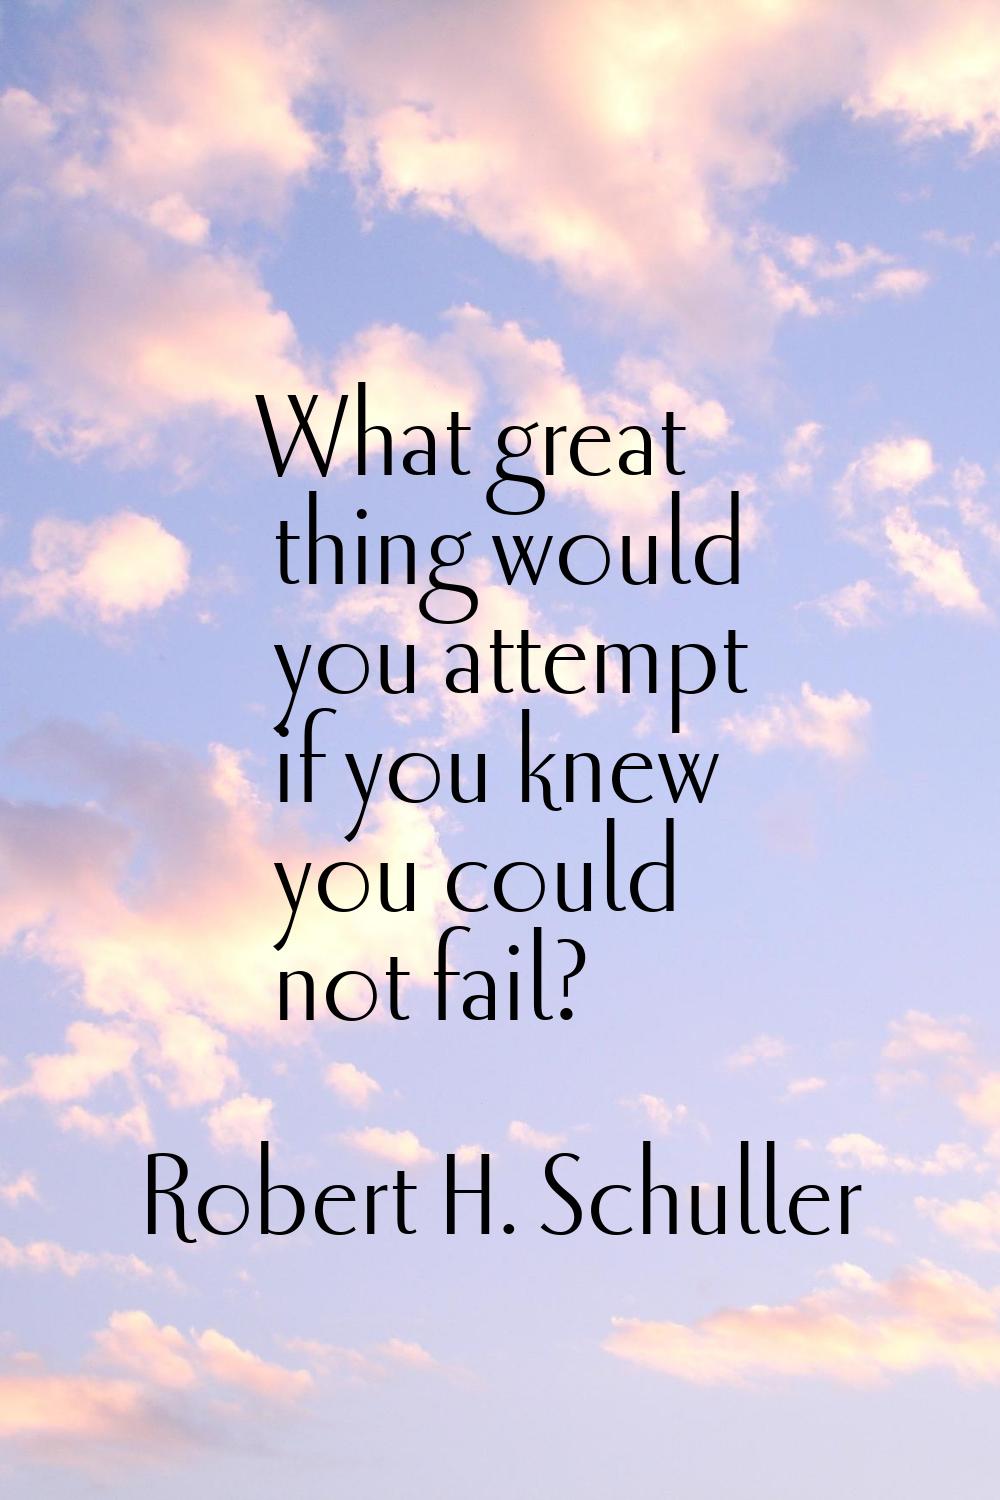 What great thing would you attempt if you knew you could not fail?